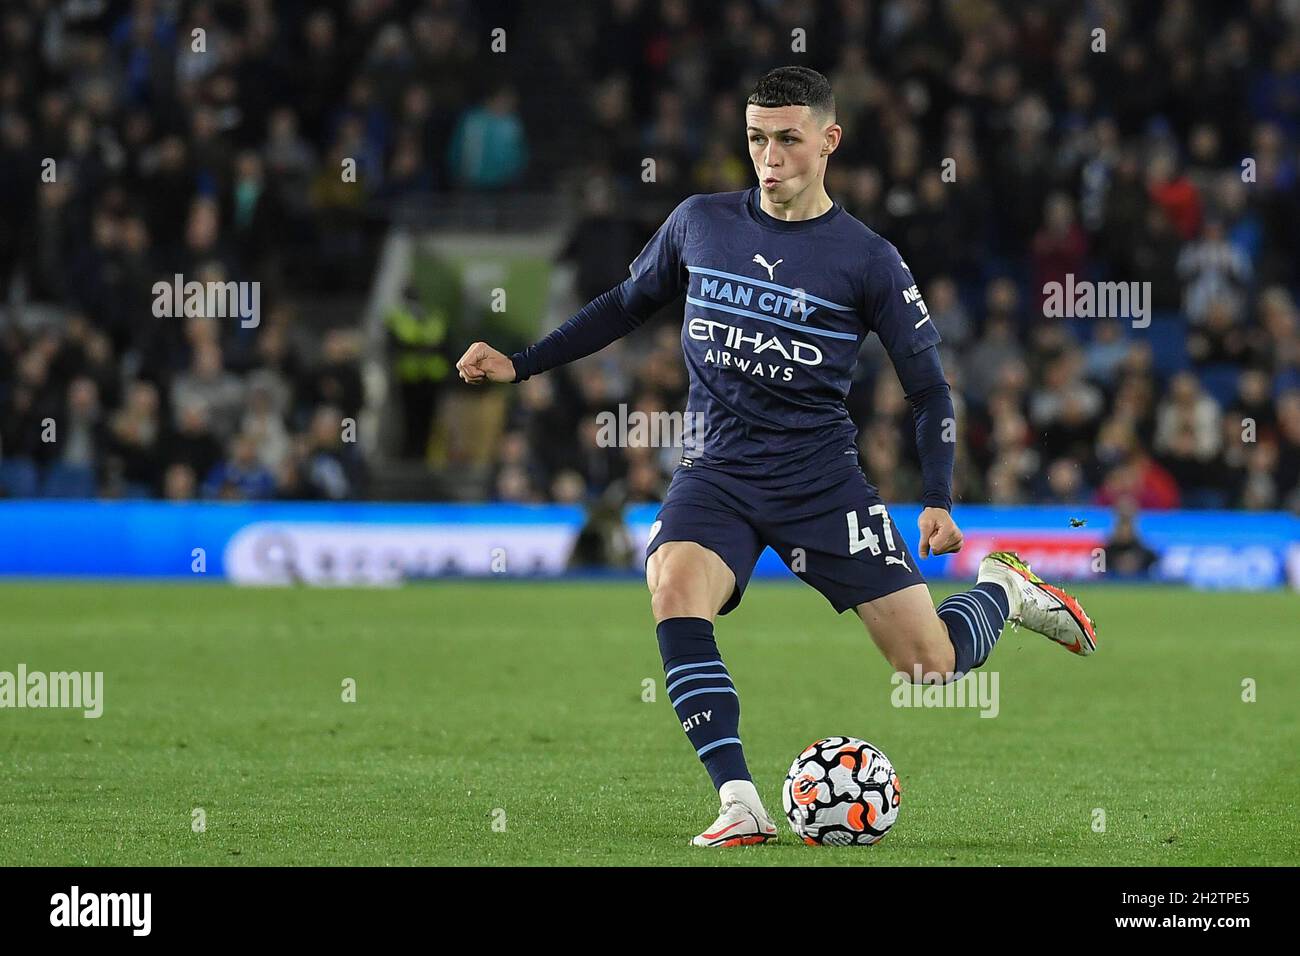 BRIGHTON, ENGLAND - OCTOBER 23: Phil Foden of Manchester City in action during the Premier League match between Brighton & Hove Albion and Manchester City at American Express Community Stadium on October 23, 2021 in Brighton, England. MB Media Stock Photo